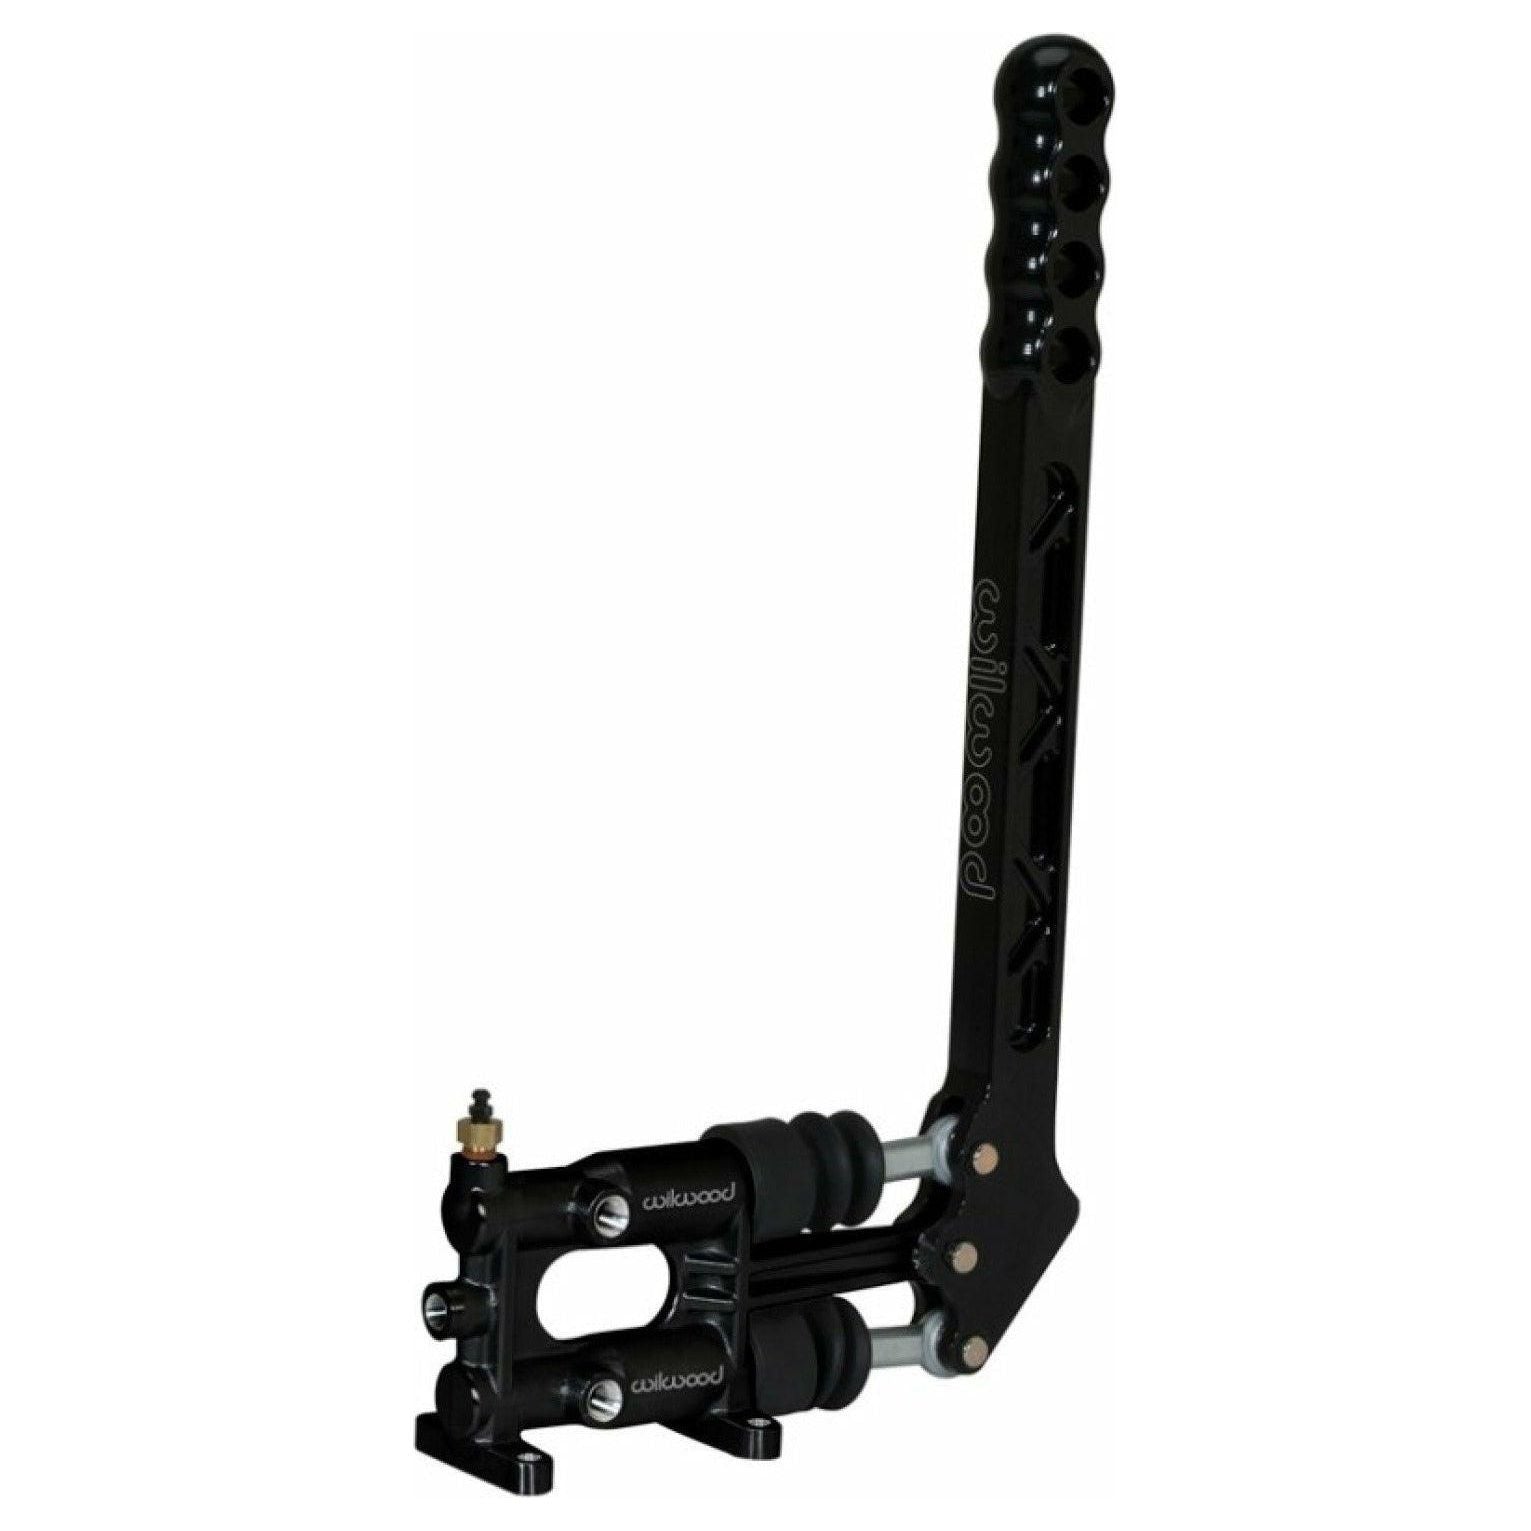 Wilwood Hand Cutting Brake Assembly - Dual M/C 11:1 Ratio - SMINKpower Performance Parts WIL340-14744 Wilwood